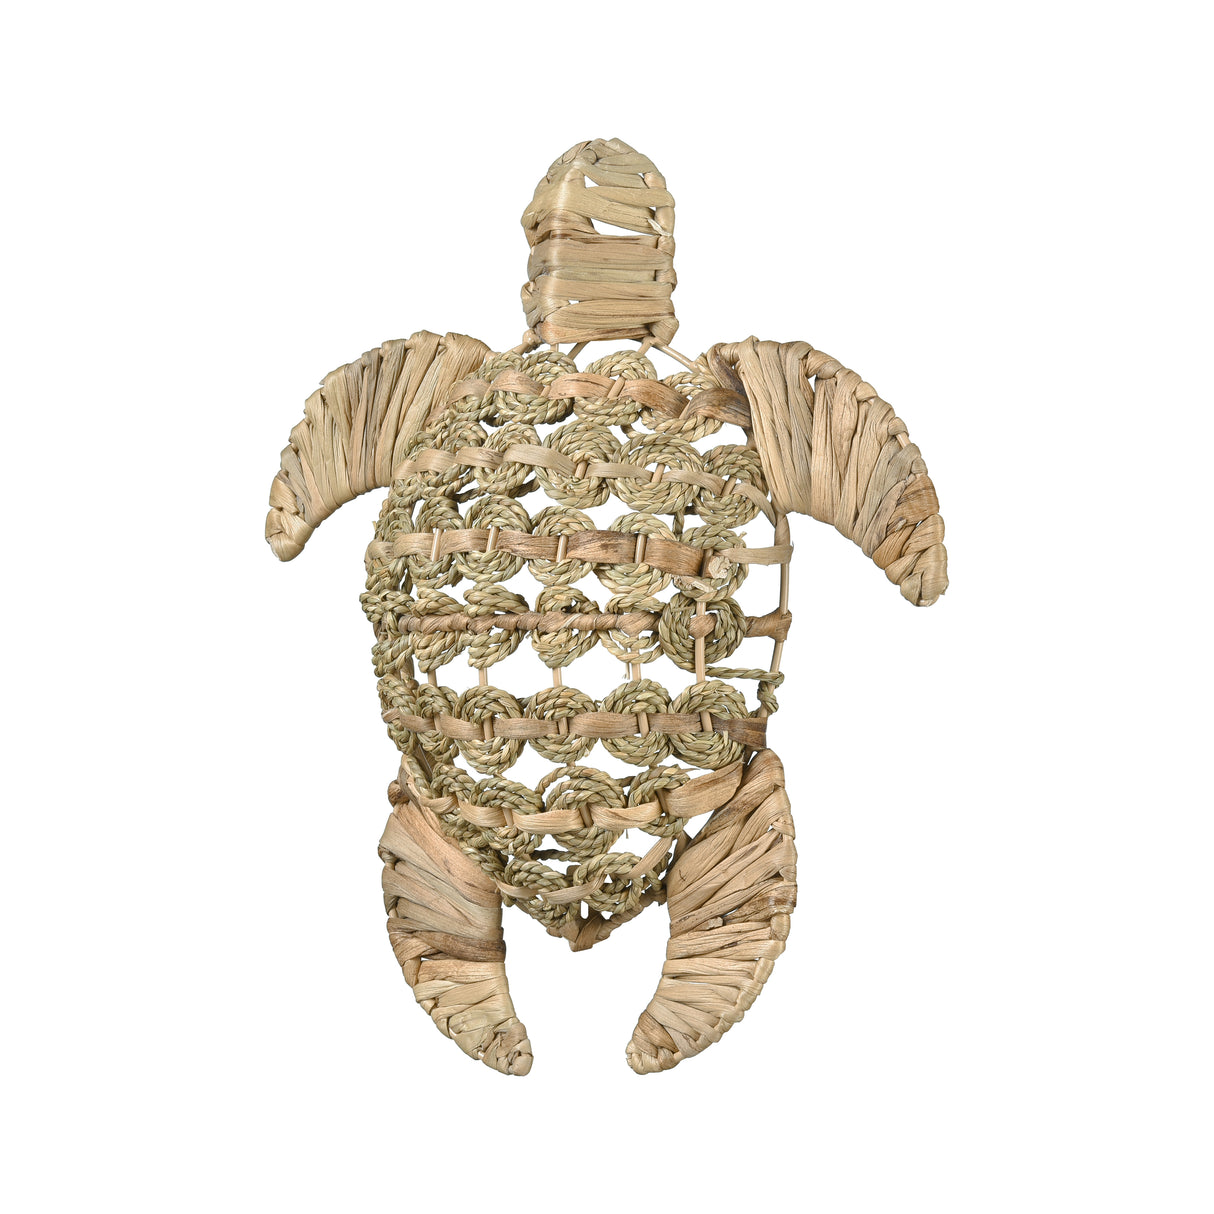 Elk S0067-11273 Ridley Turtle Object - Small Natural